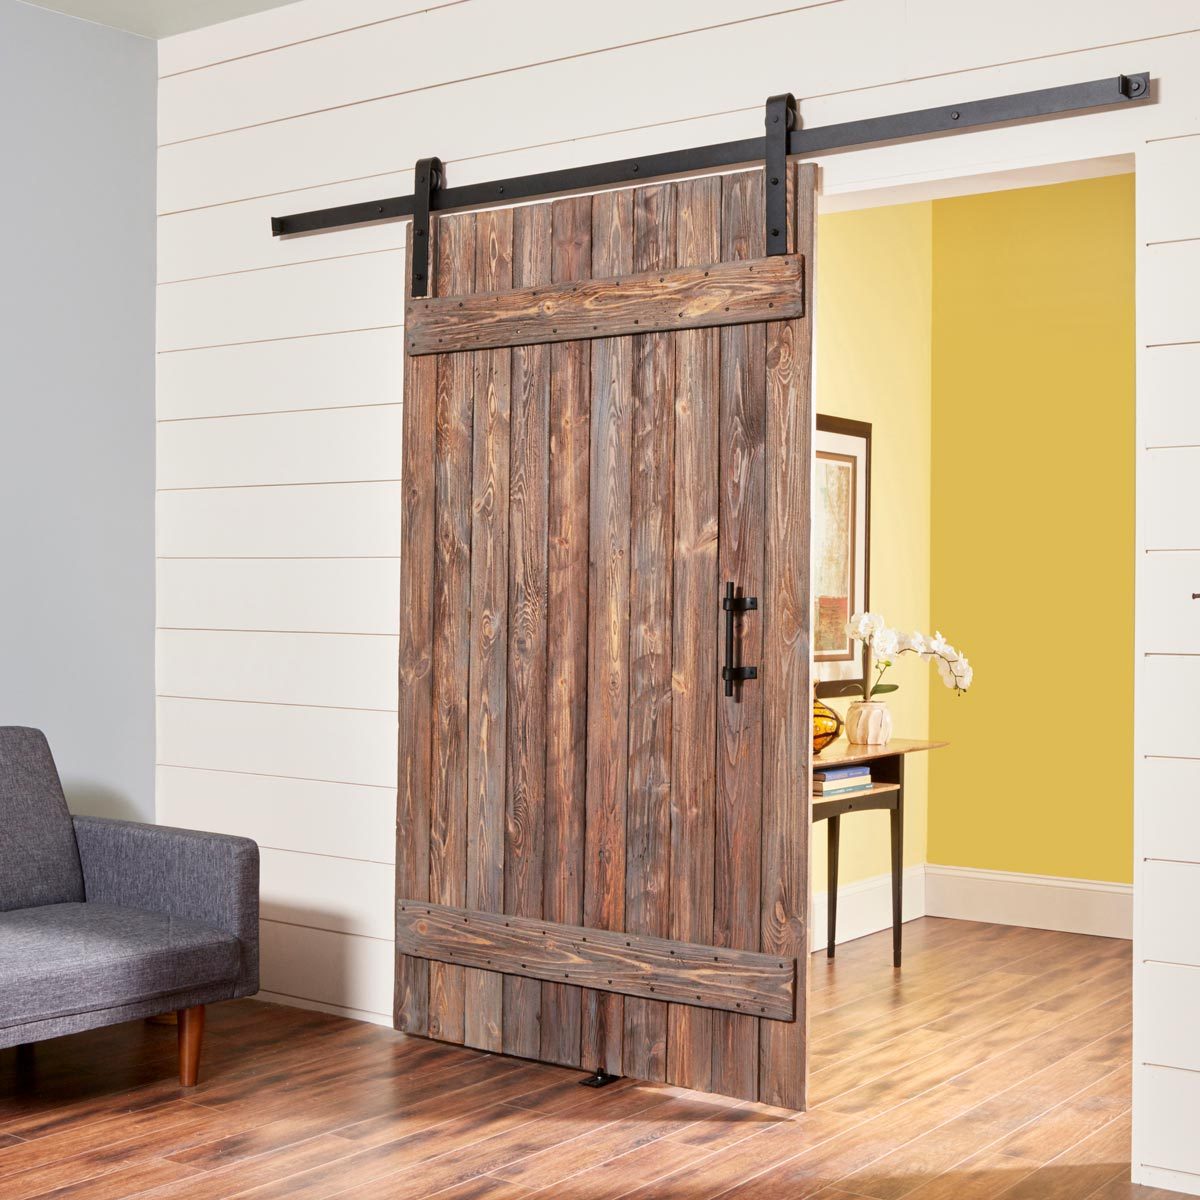 60 DIY Barn Door Projects to Add Some Farmhouse Flair to Your Home